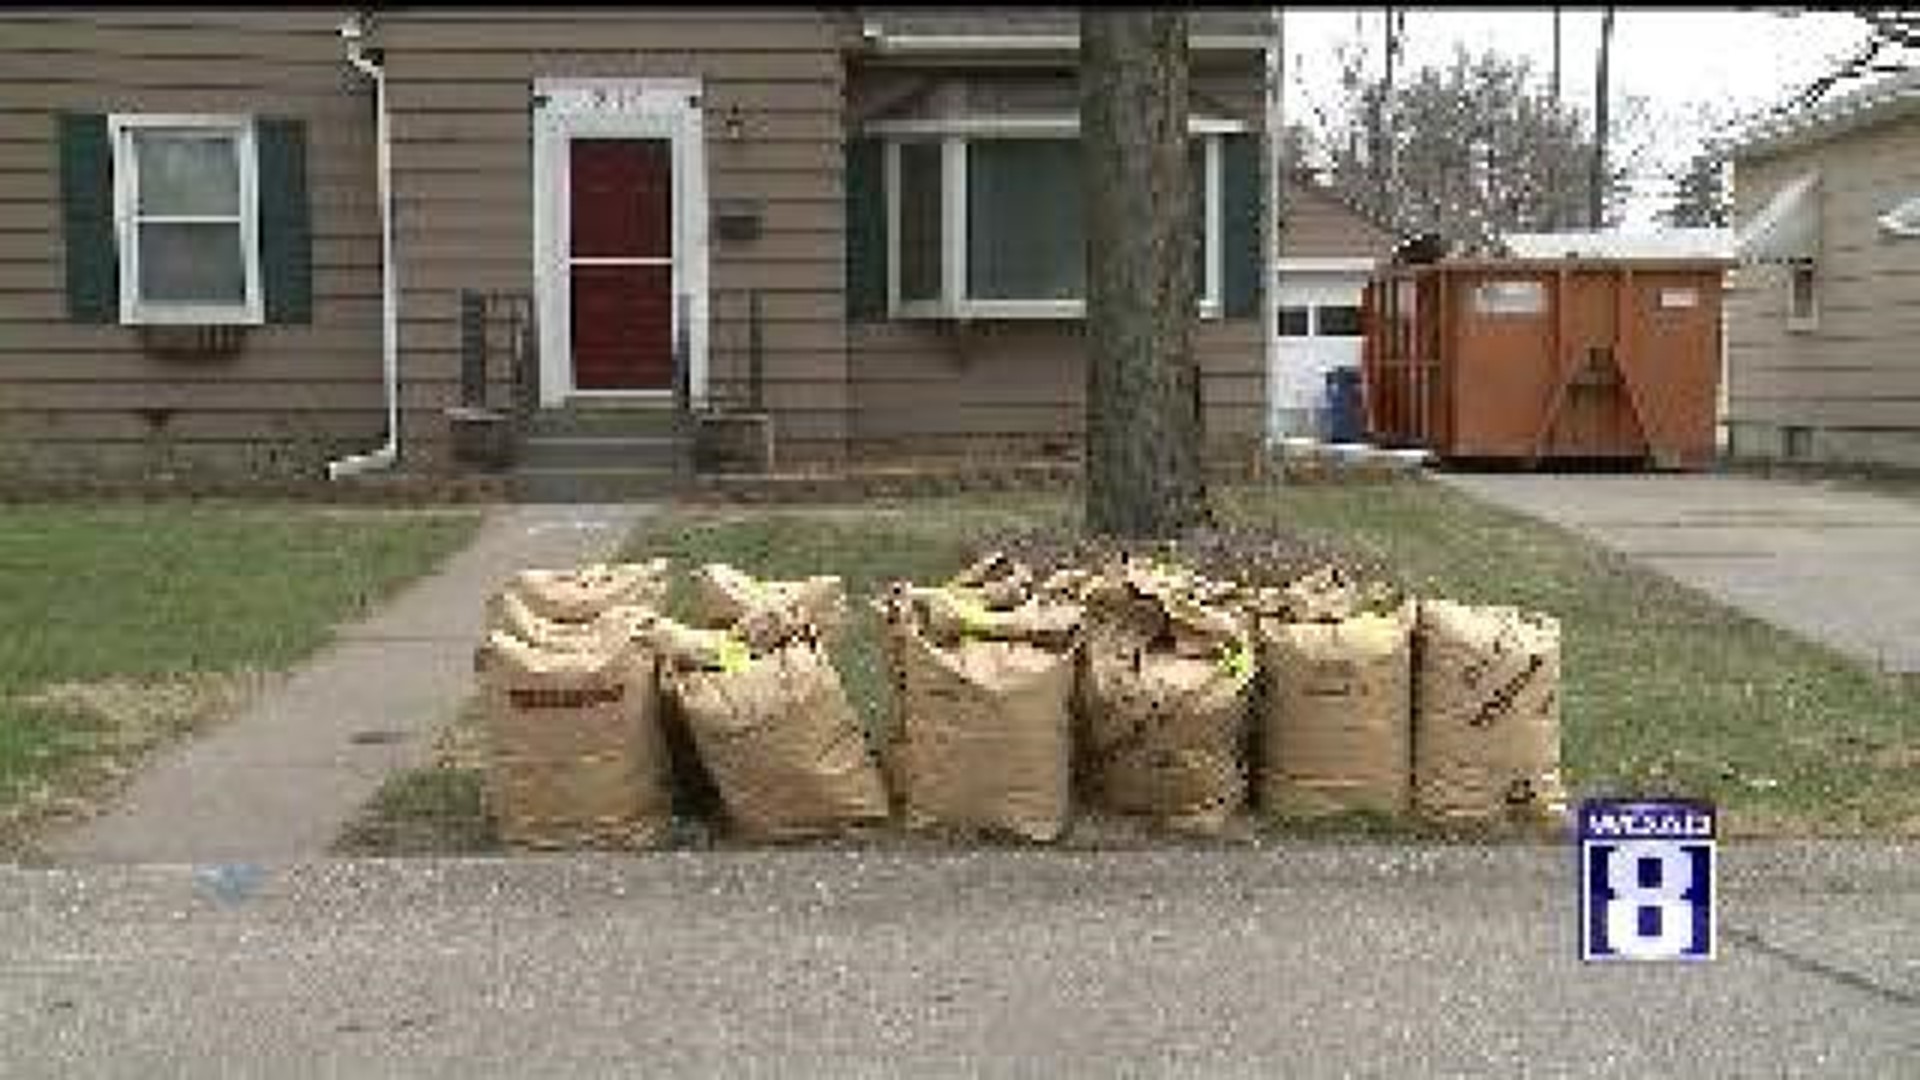 Yard waste collection